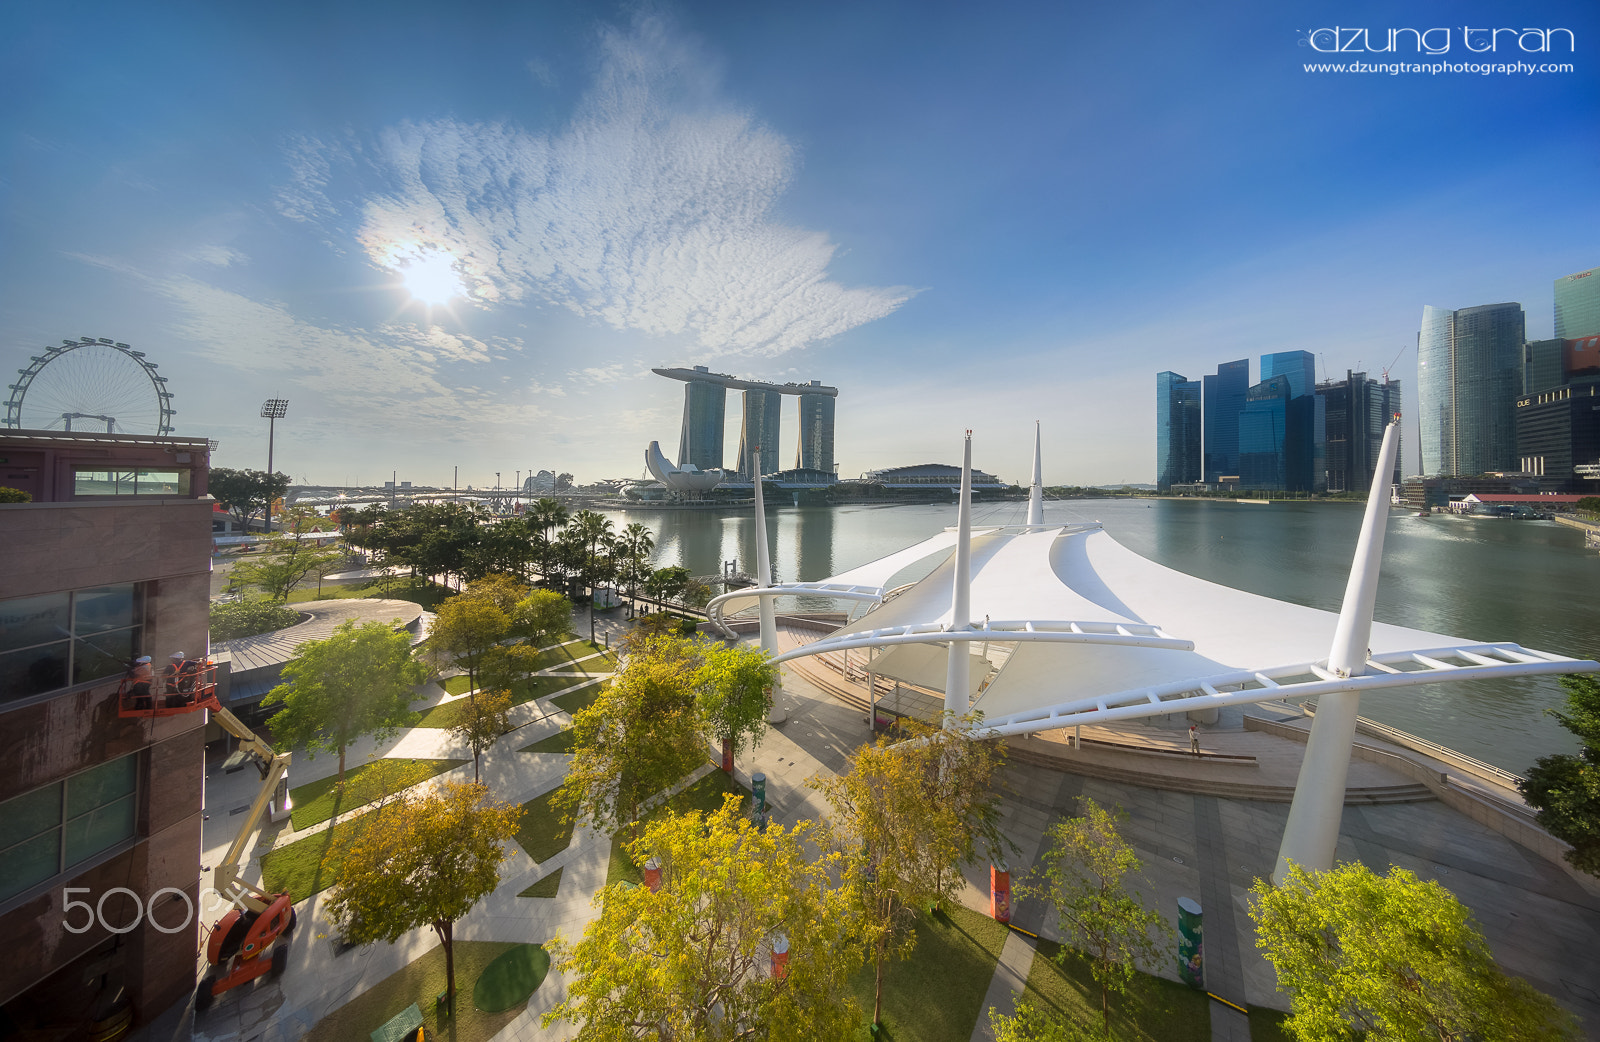 Sony a7R sample photo. Morning at singapore photography